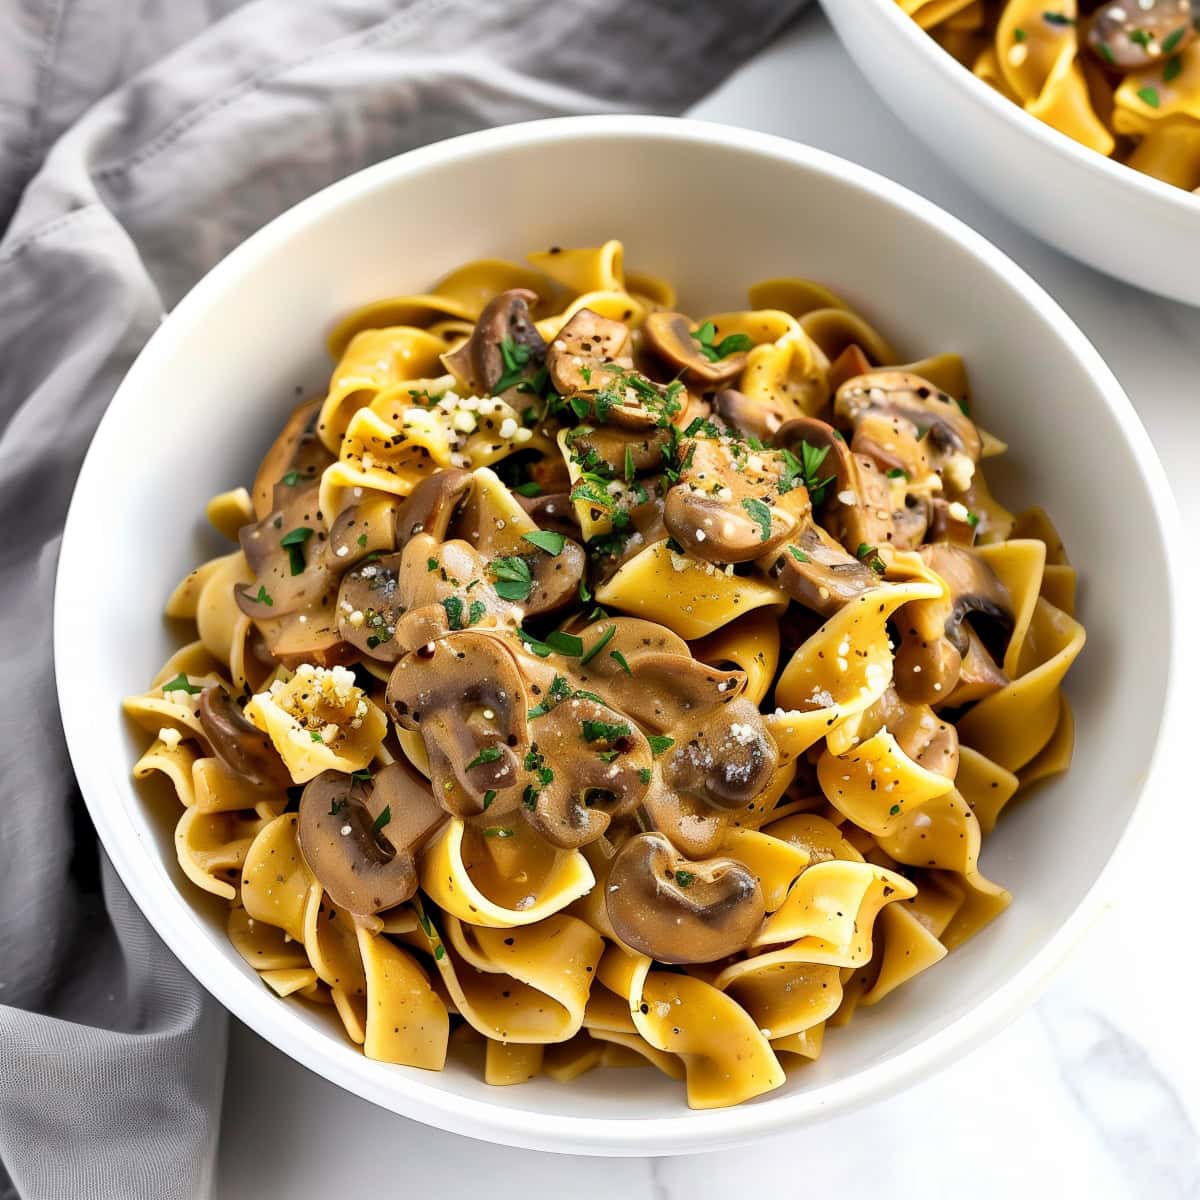 A creamy mushroom stroganoff with a rich sauce, topped with a sprinkle of chopped herbs.